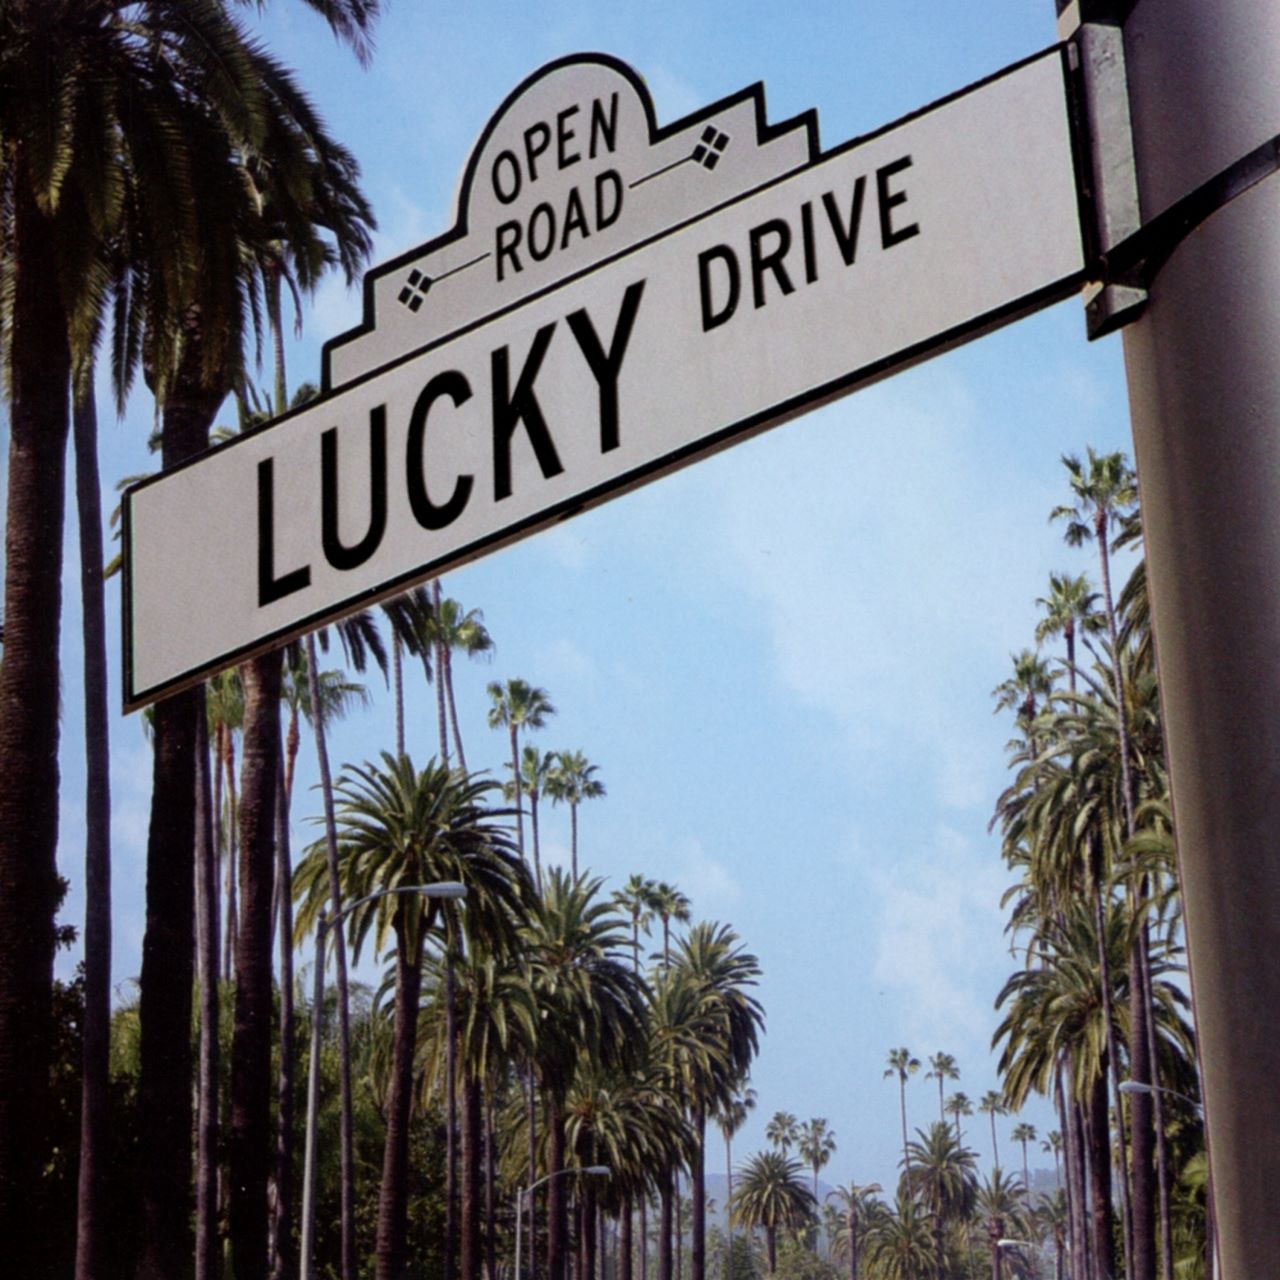 Open Road - Lucky Drive cover album